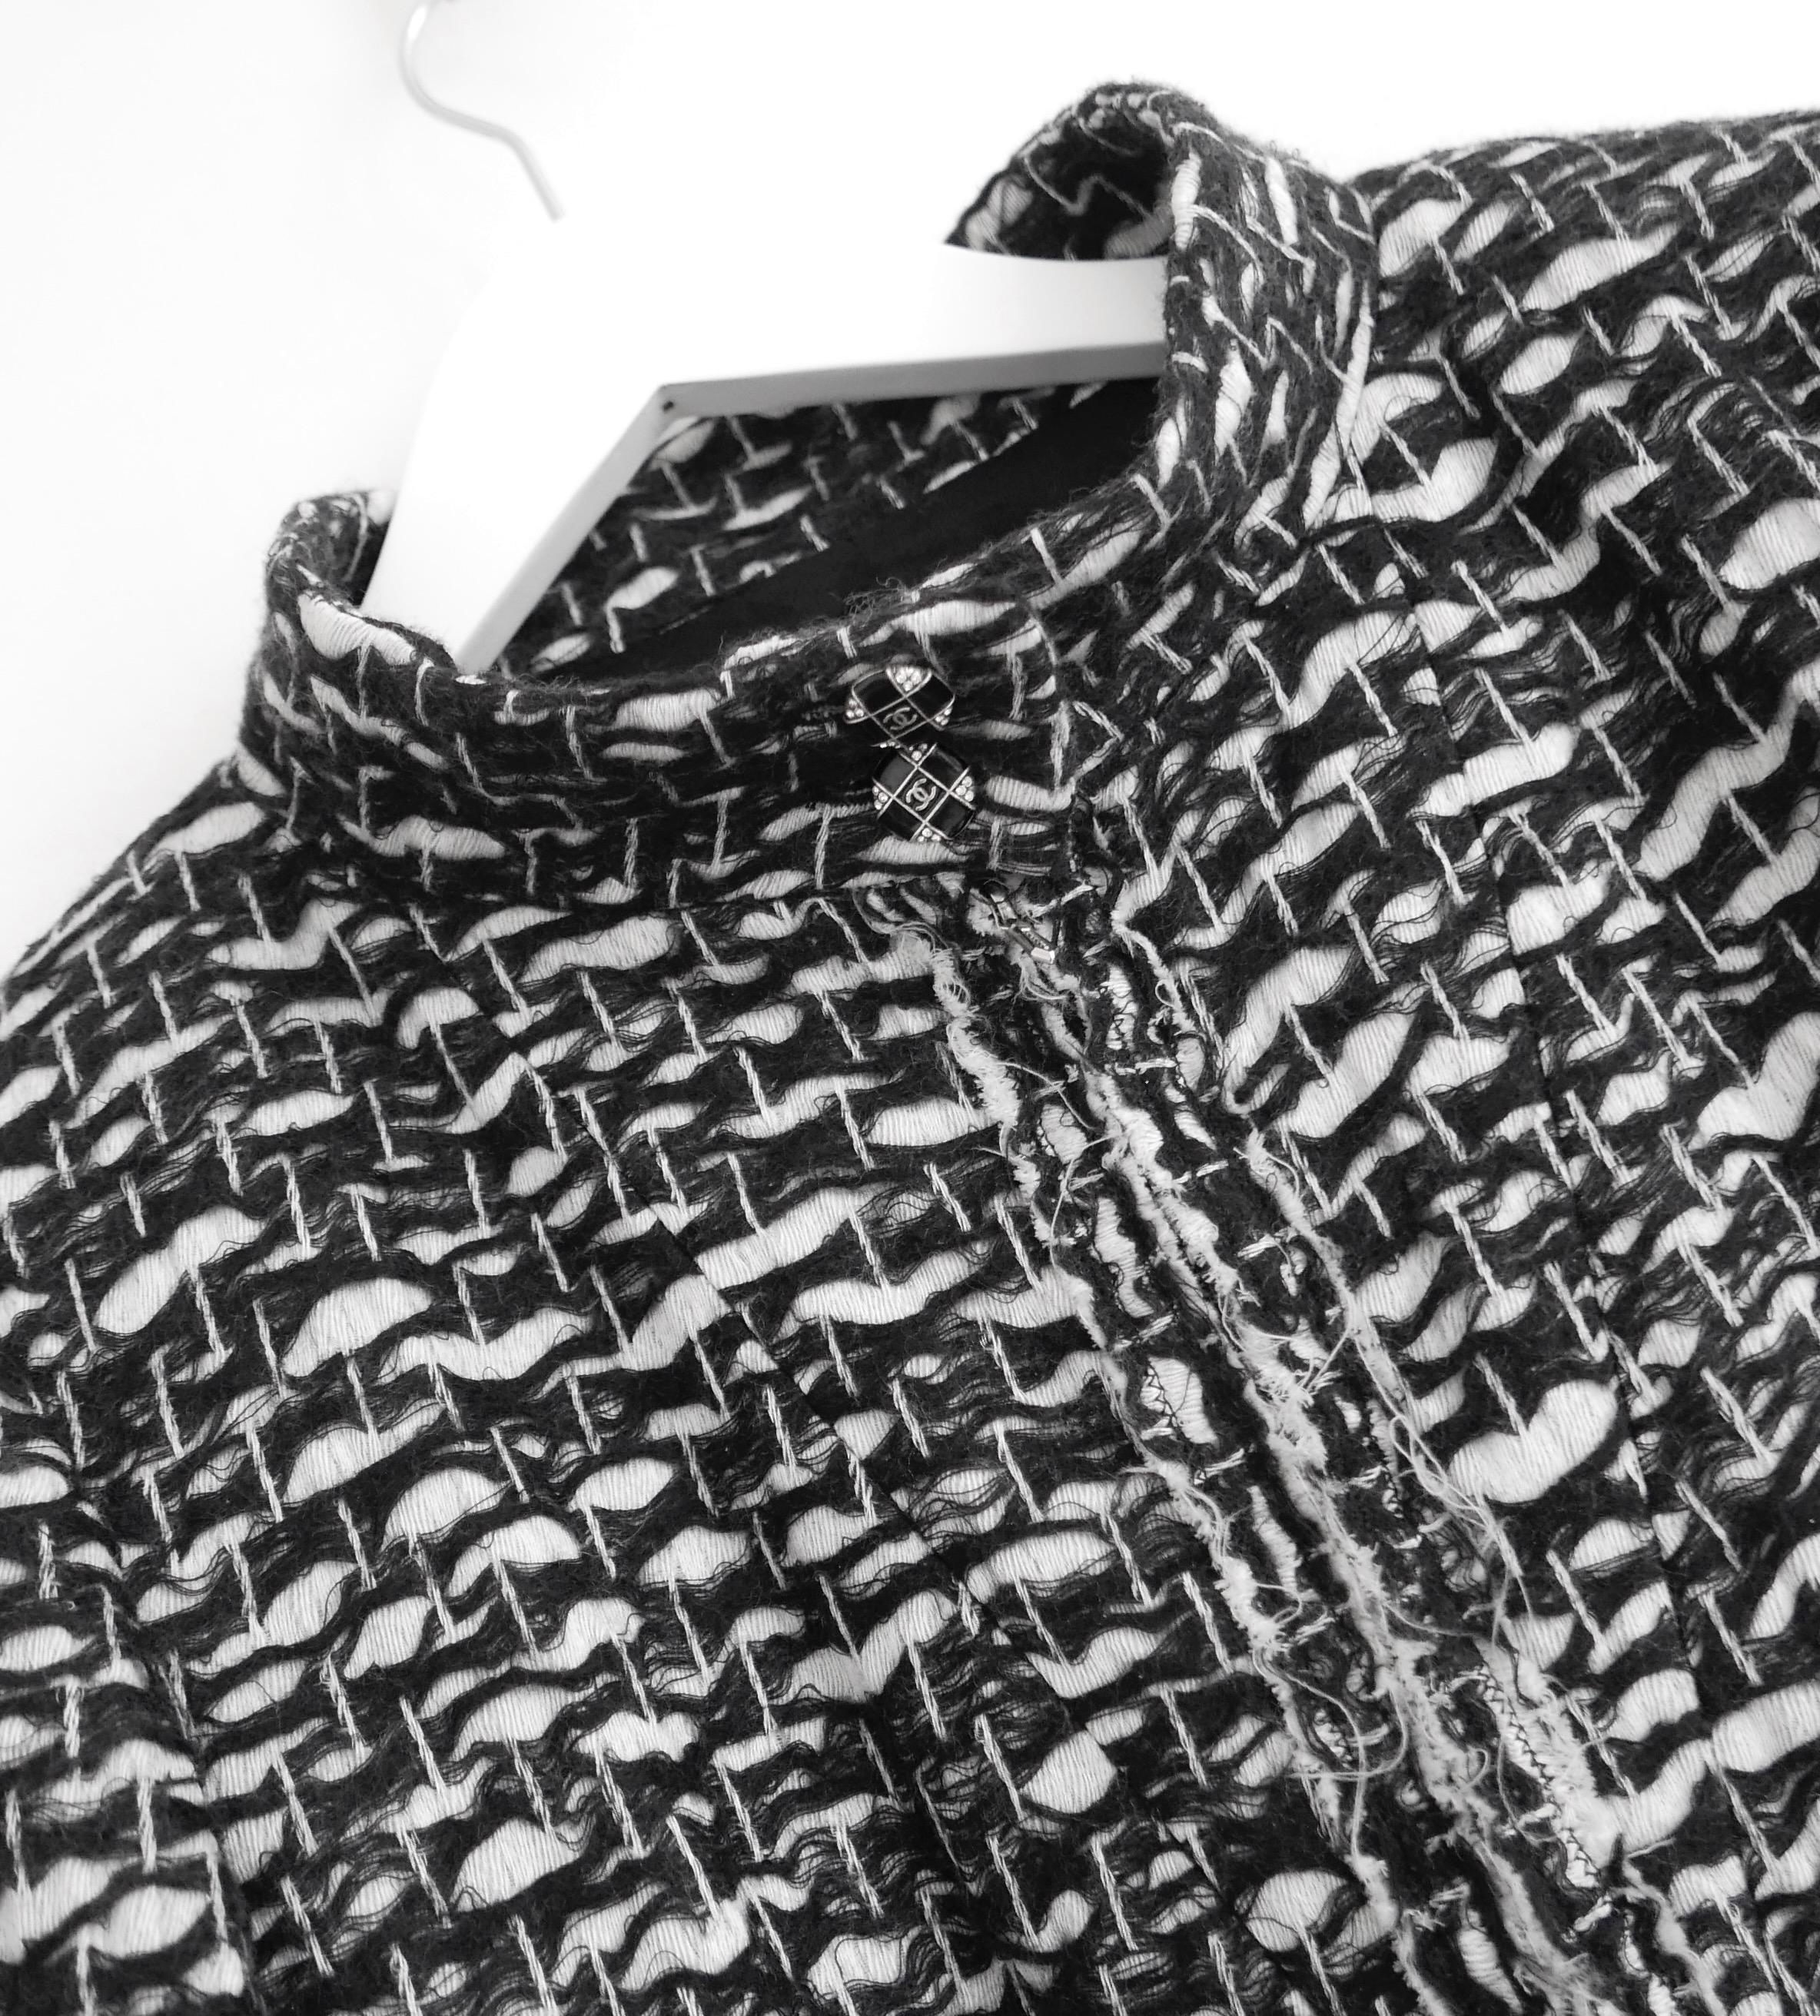 Chanel Fall 2010 Black & White Loose Weave Tweed Coat In Excellent Condition For Sale In London, GB